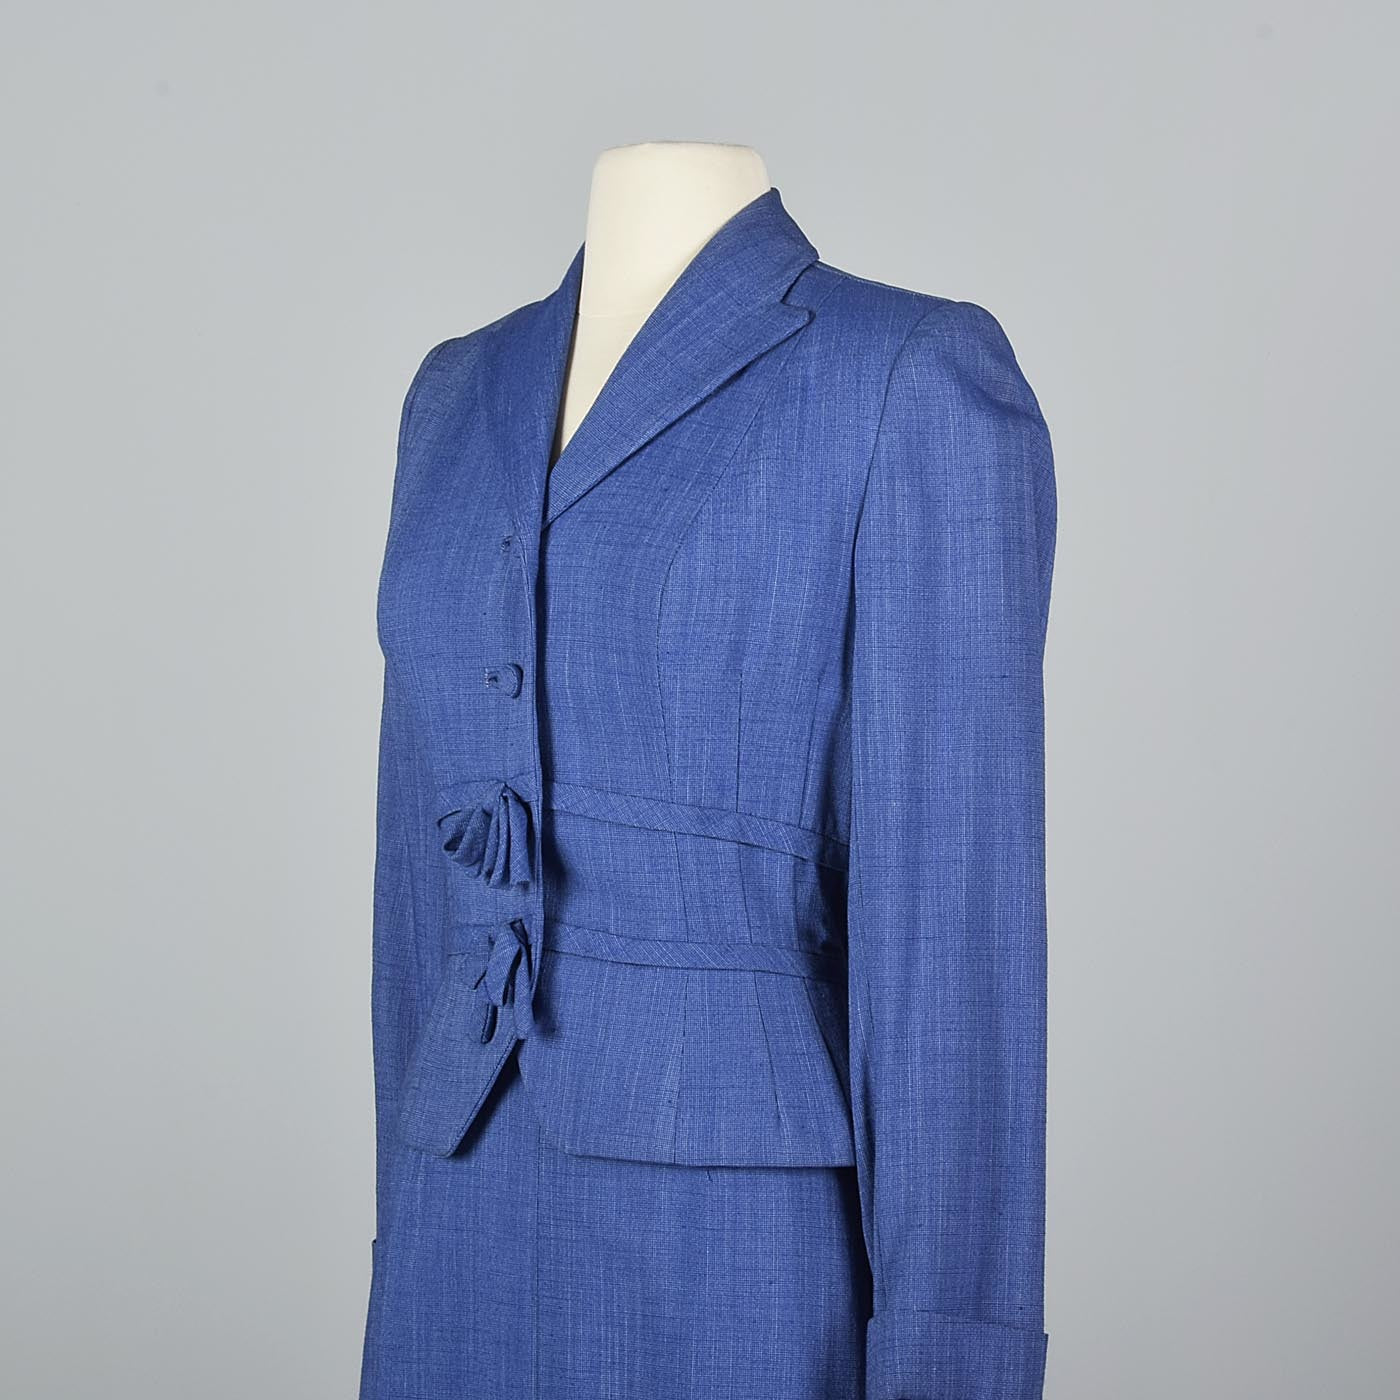 1950s Hourglass Blue Skirt Suit